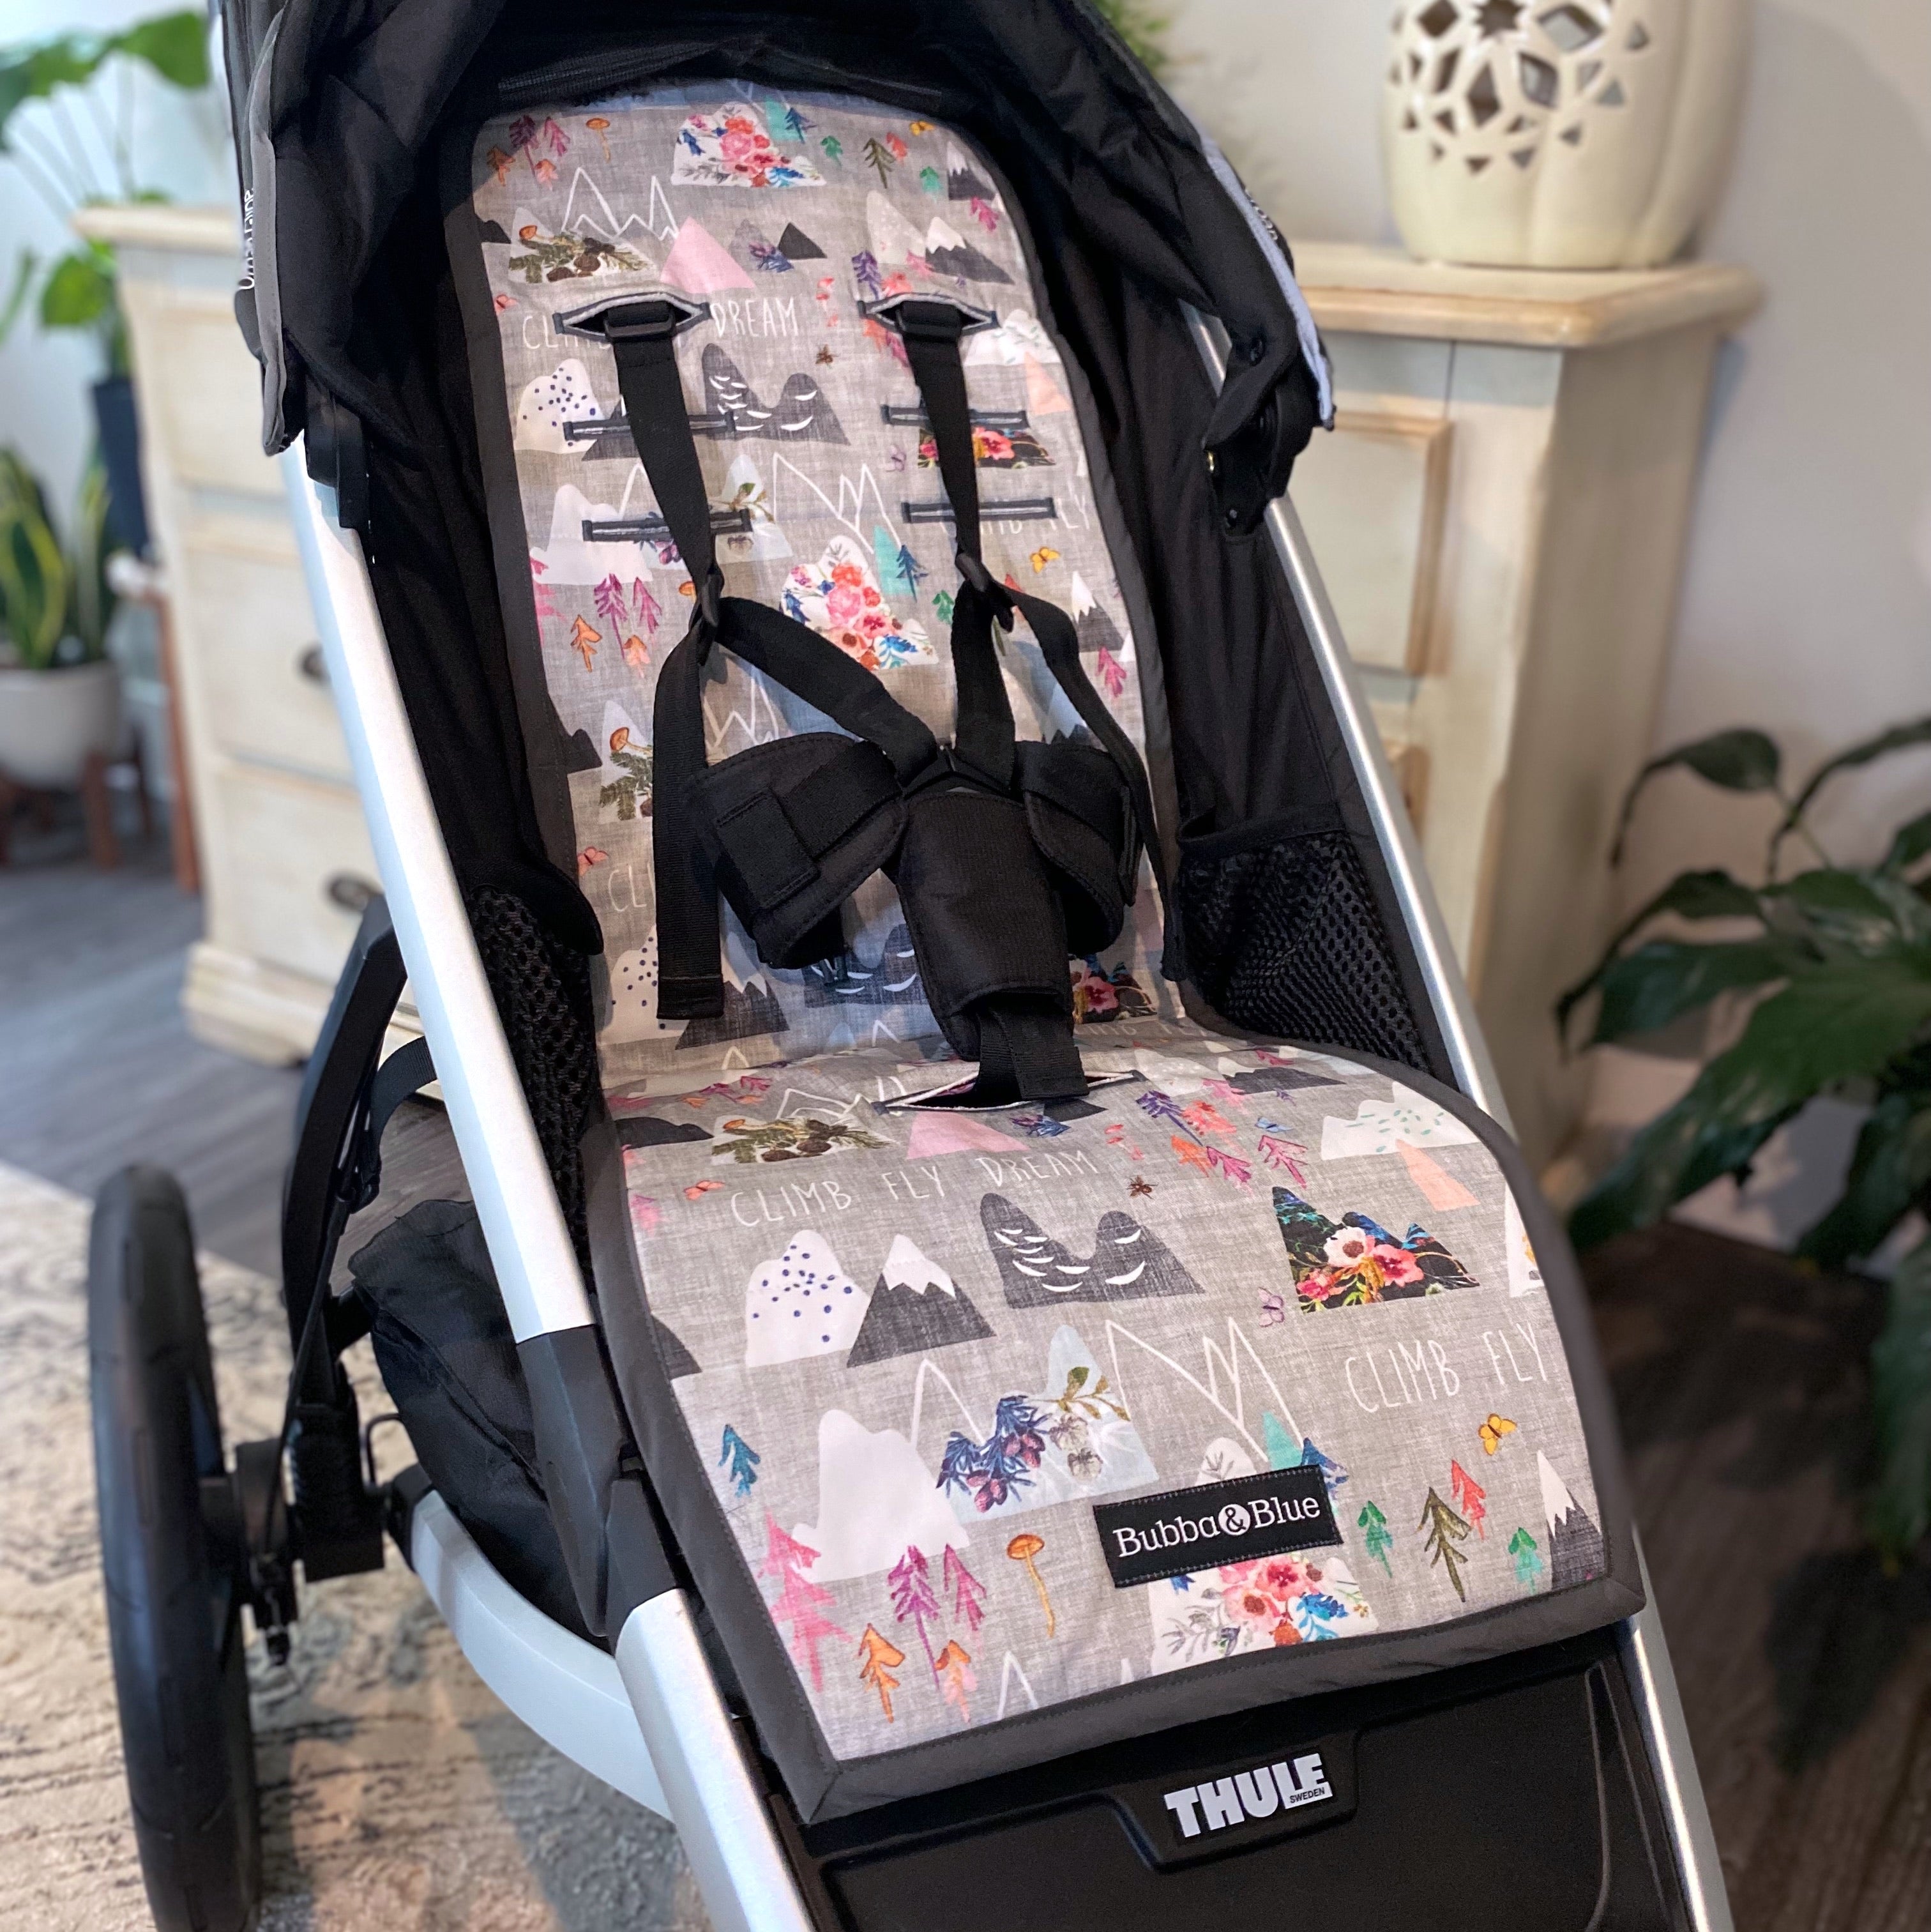 Stroller liner and foormuff set made to fit most strollers. Get a custom fit for a wide variety of strollers. These save your seat from wear and tear. This one is featured in the pink mountain print.